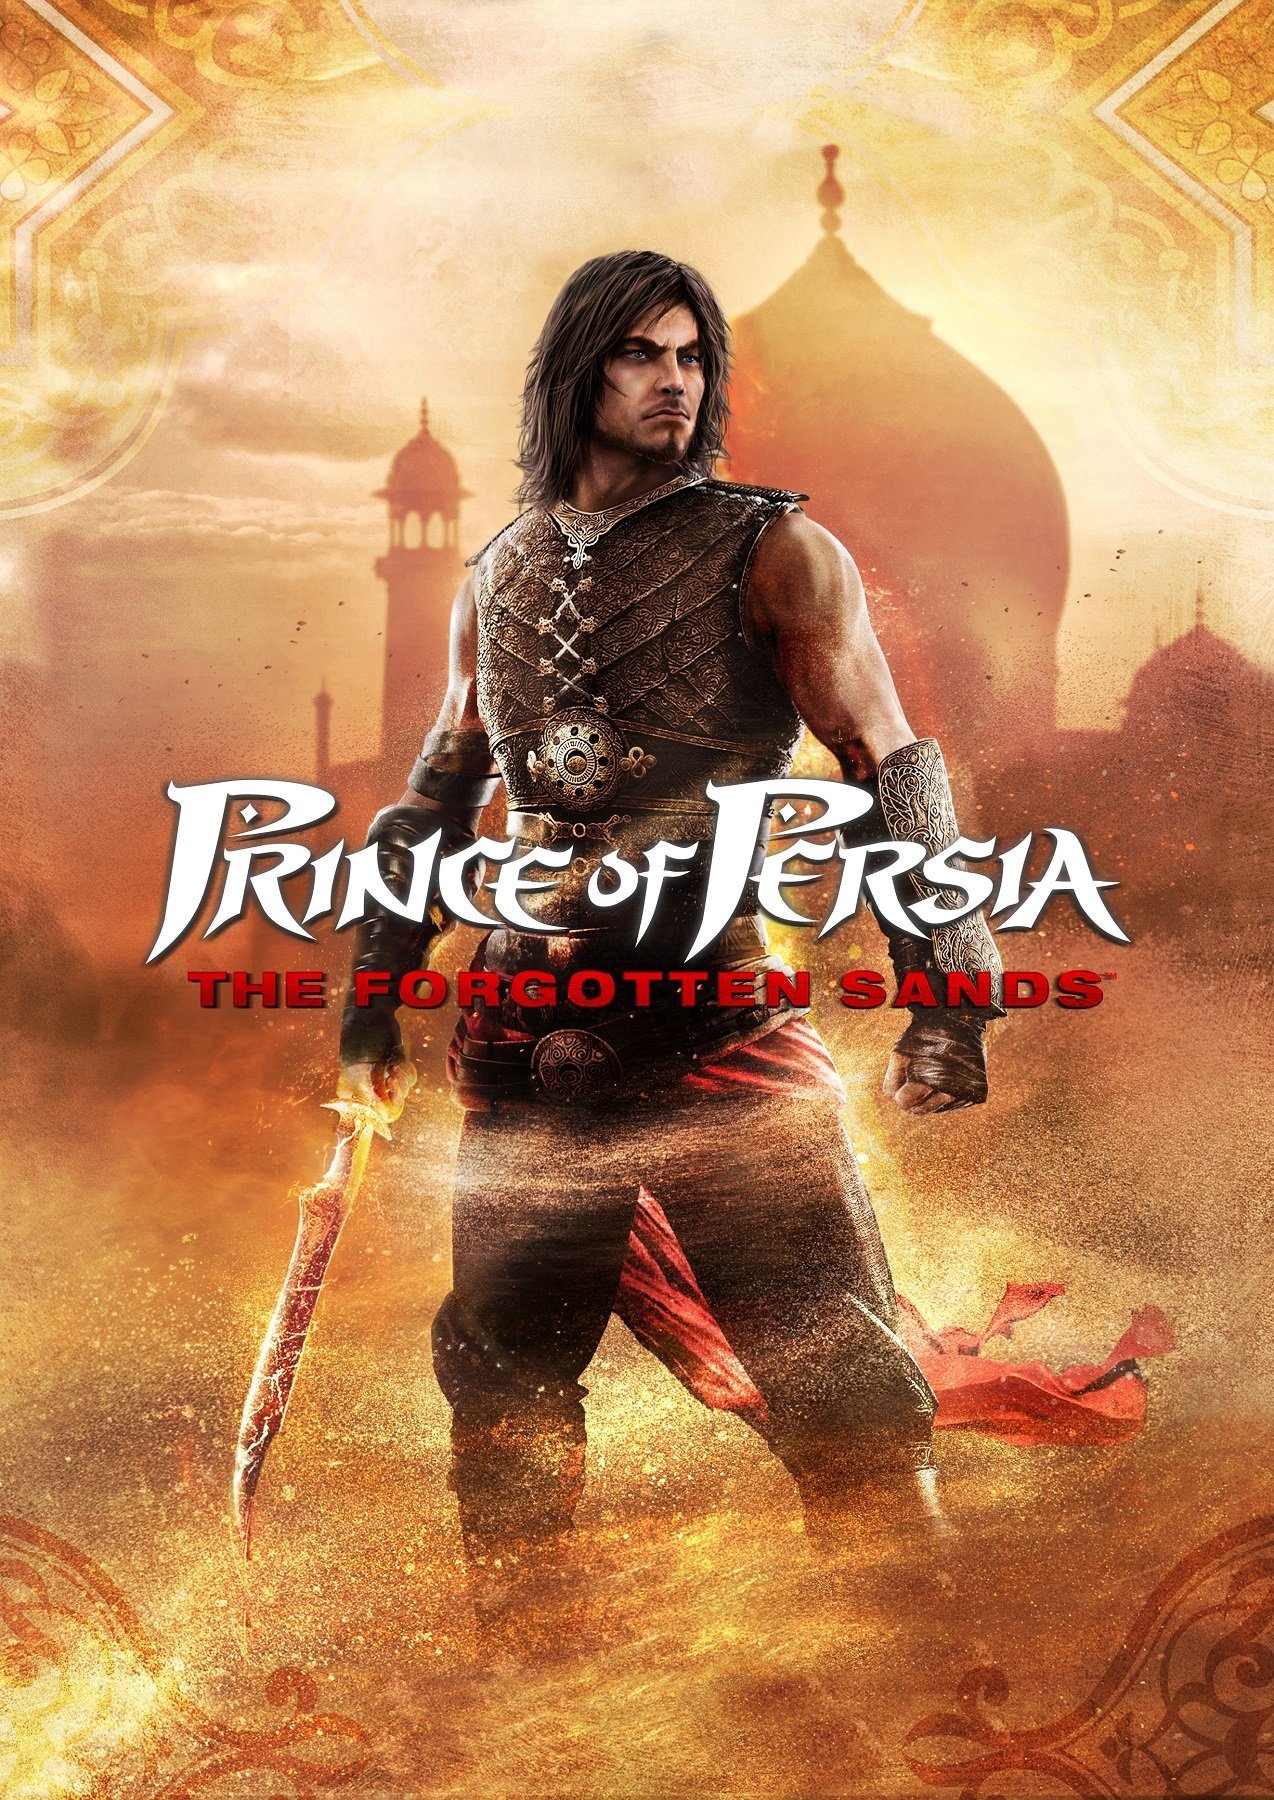 Image of Prince of Persia: The Forgotten Sands